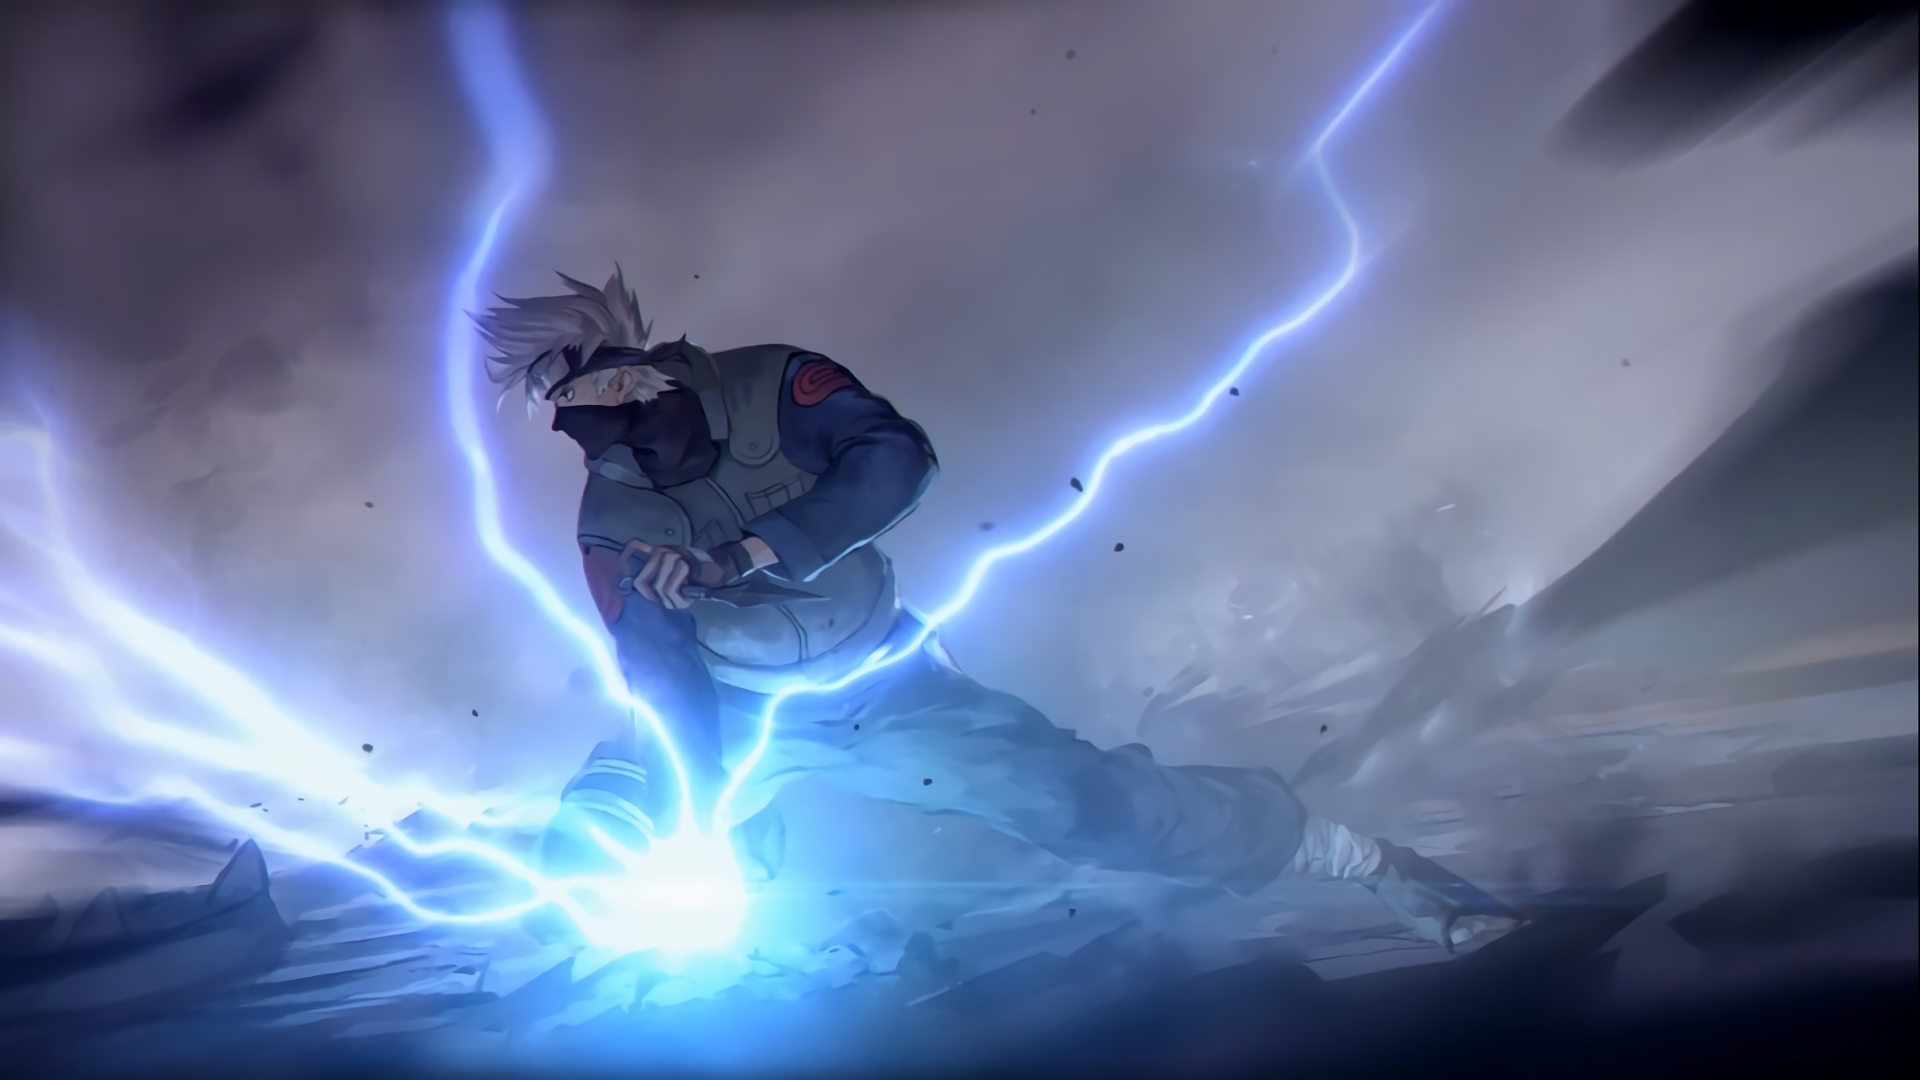 Kakashi Hatake Wallpaper Background Image. View, download, comment, and rate. Anime wallpaper 1920x 1080p anime wallpaper, HD anime wallpaper